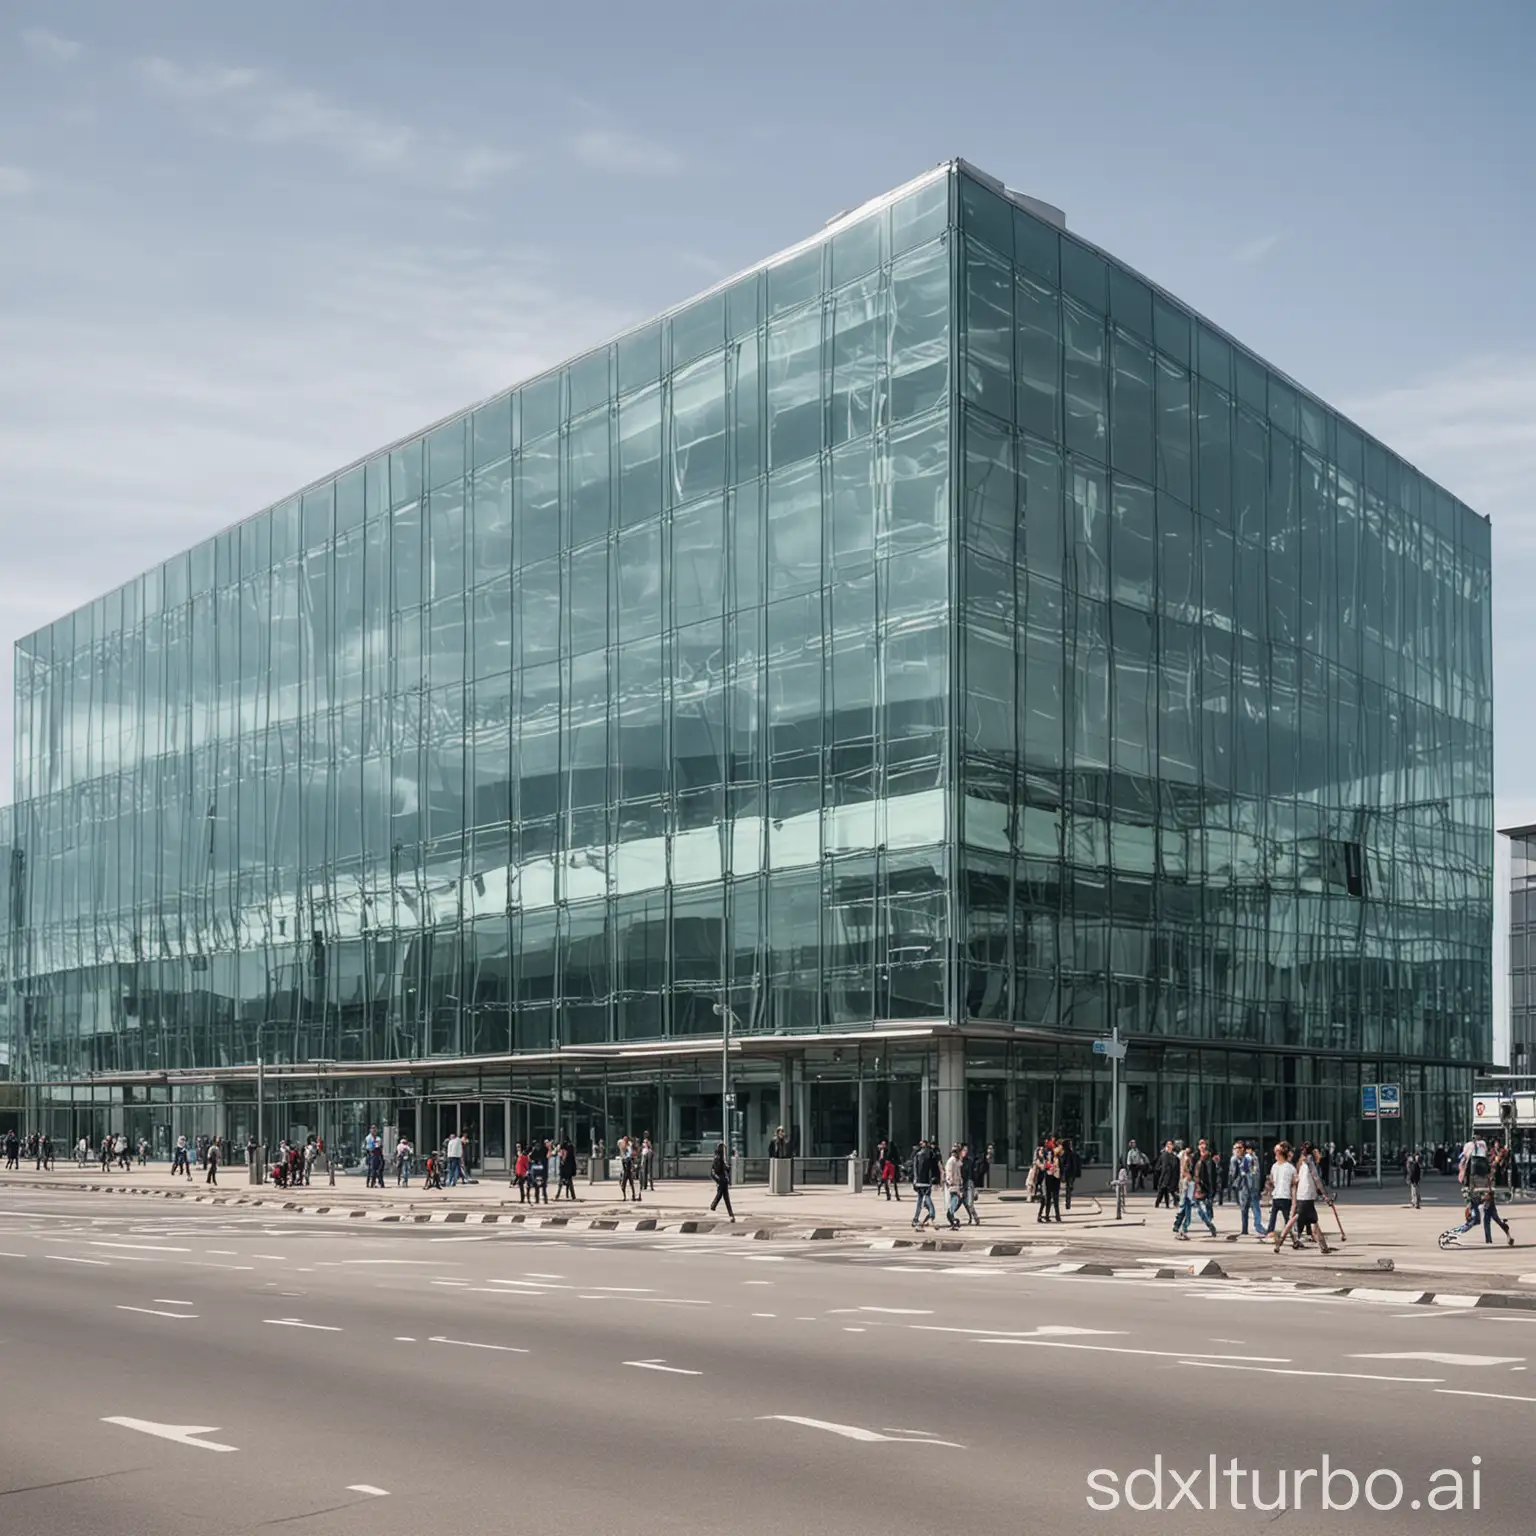 A large glass building with a modern design. The building is located in a busy area, near the airport. There are people walking and driving in the background.